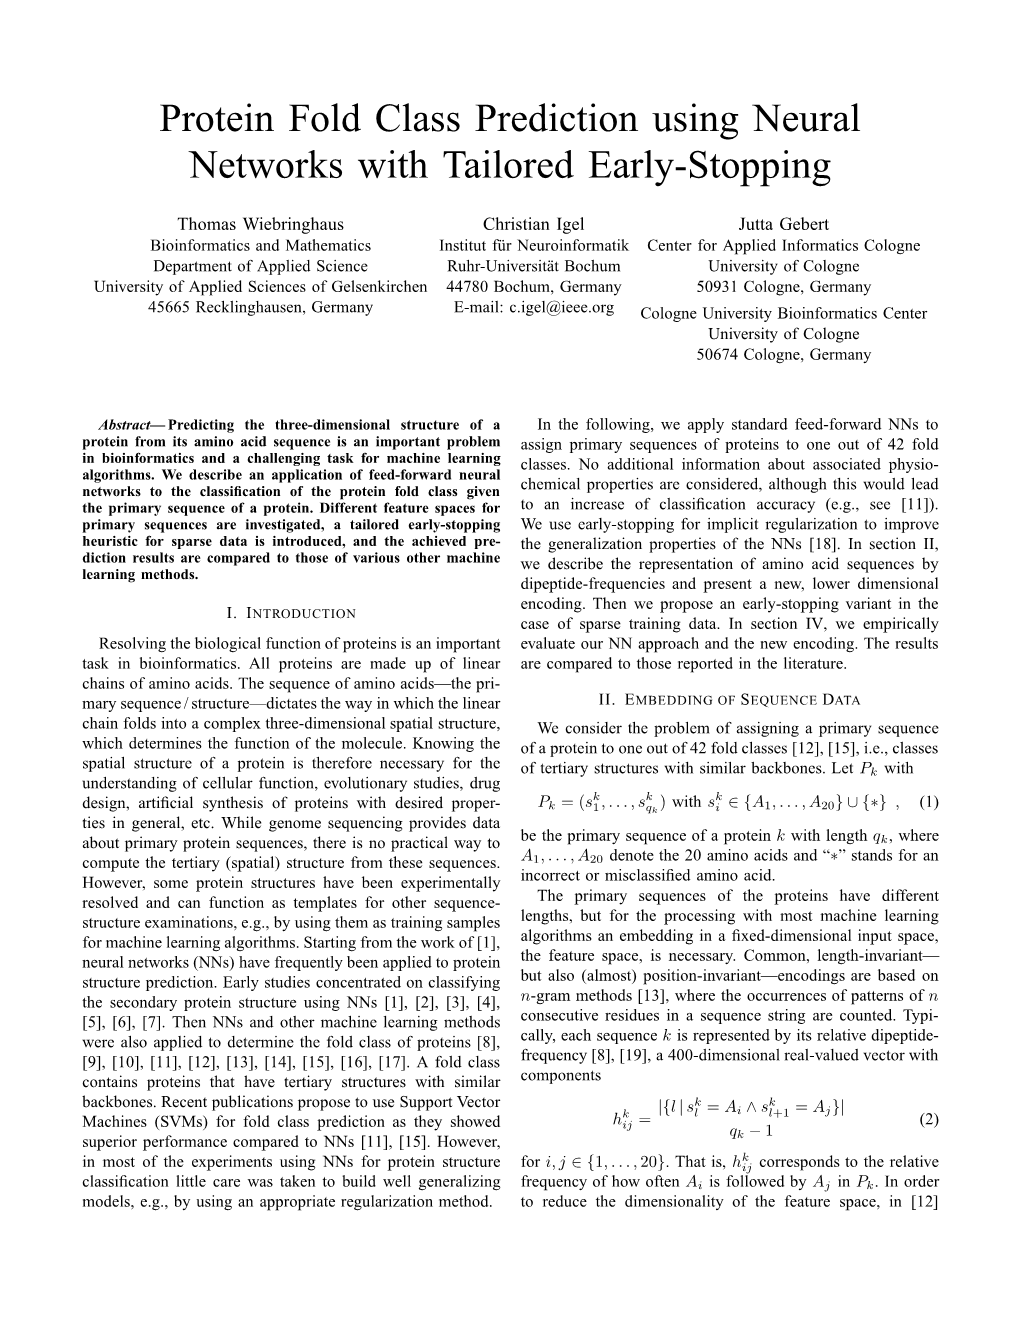 Protein Fold Class Prediction Using Neural Networks with Tailored Early-Stopping